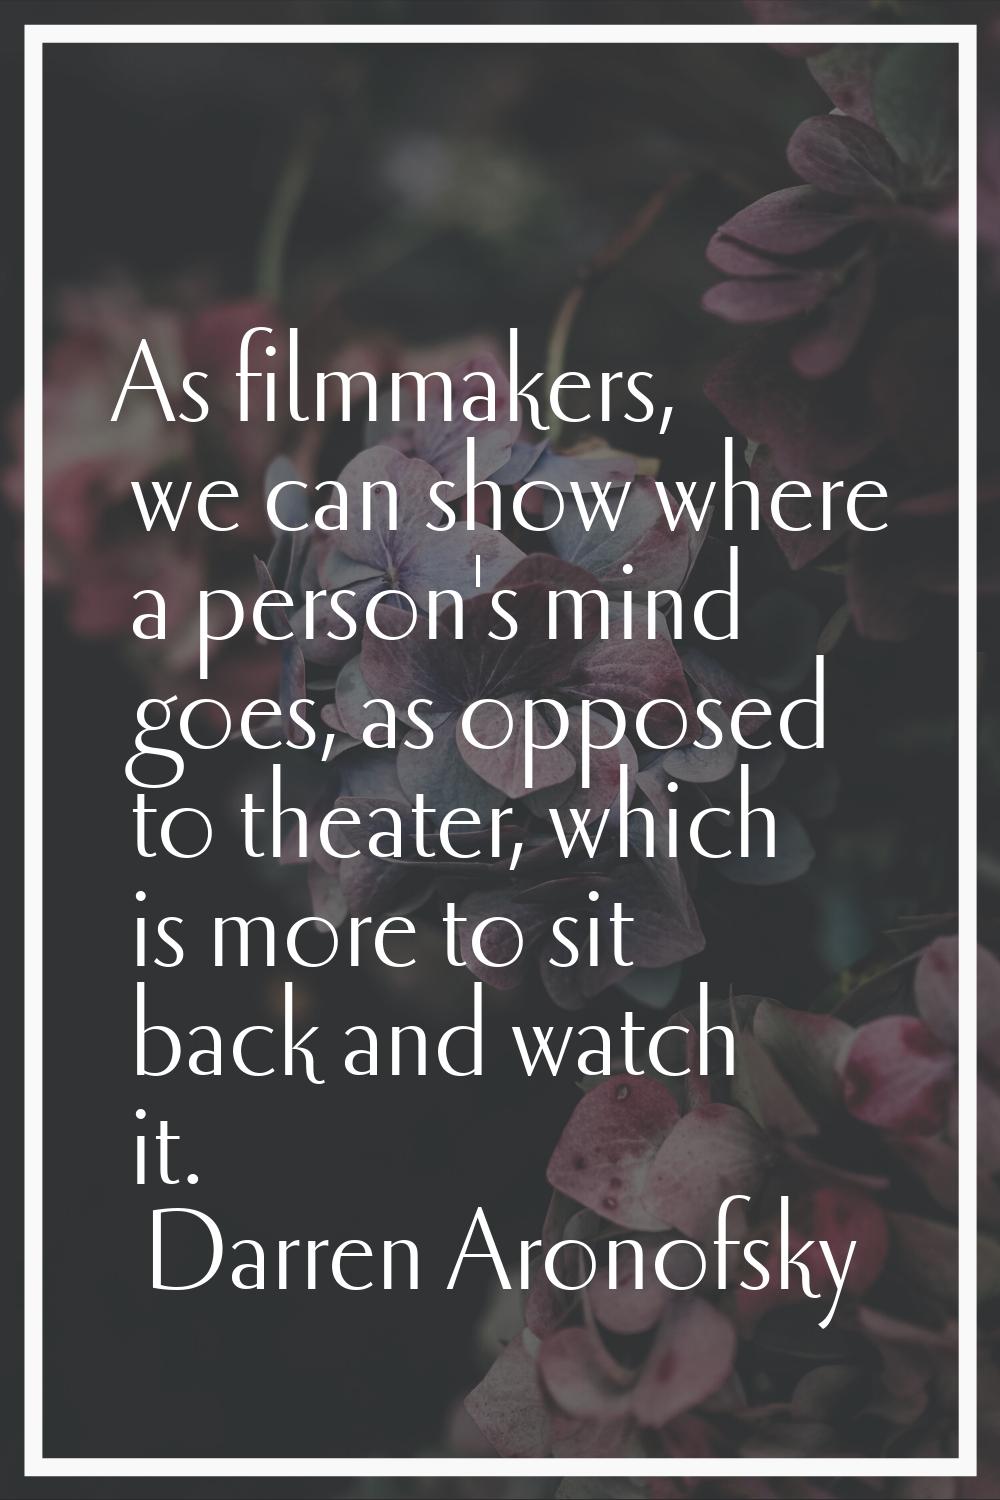 As filmmakers, we can show where a person's mind goes, as opposed to theater, which is more to sit 